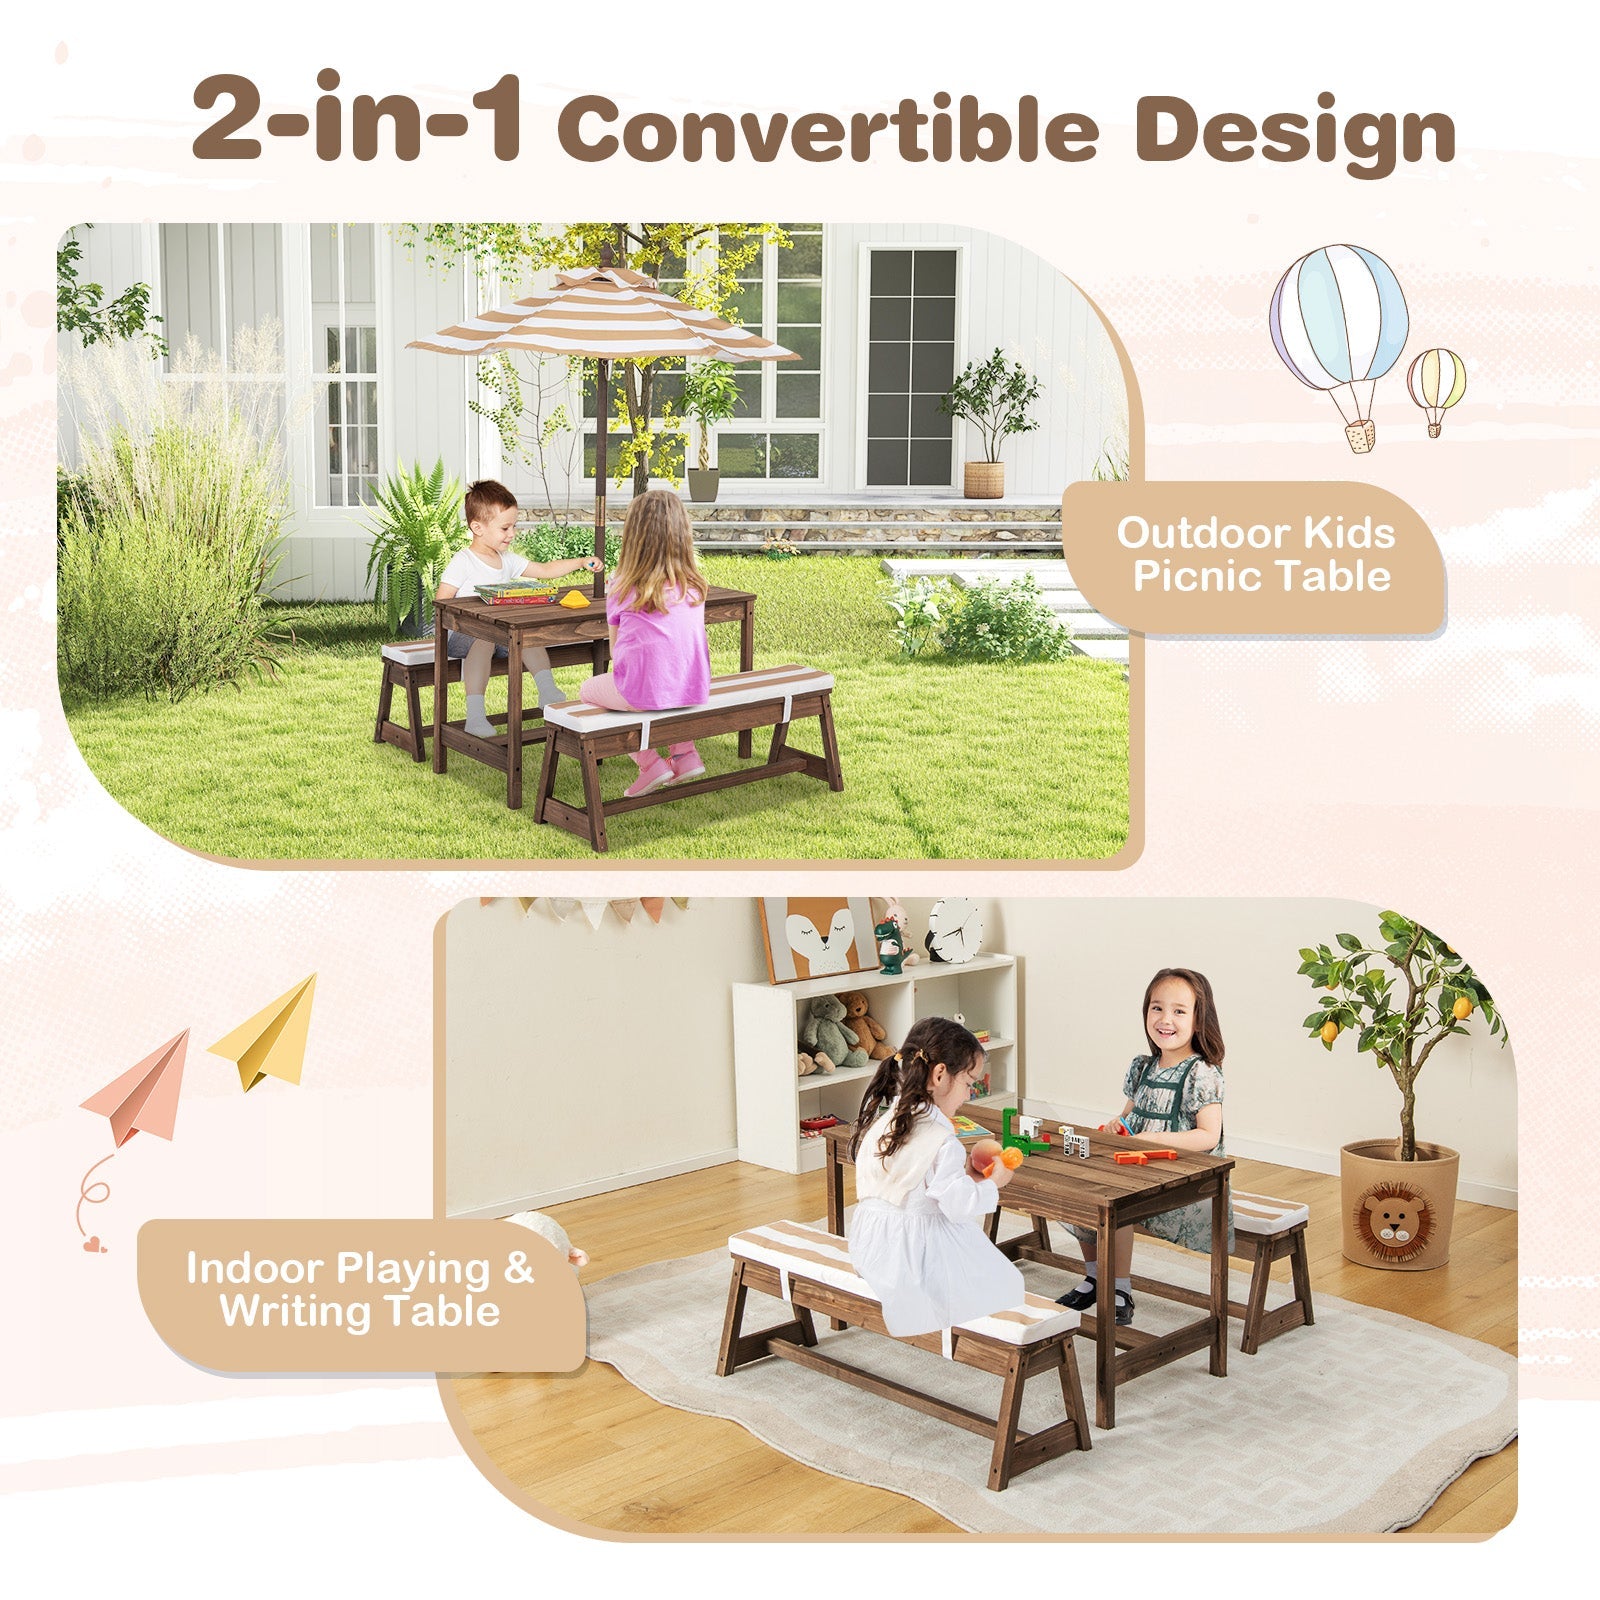 Children's Patio Dining: Table & Bench Set with Umbrella & Cushions - Smiles Guaranteed